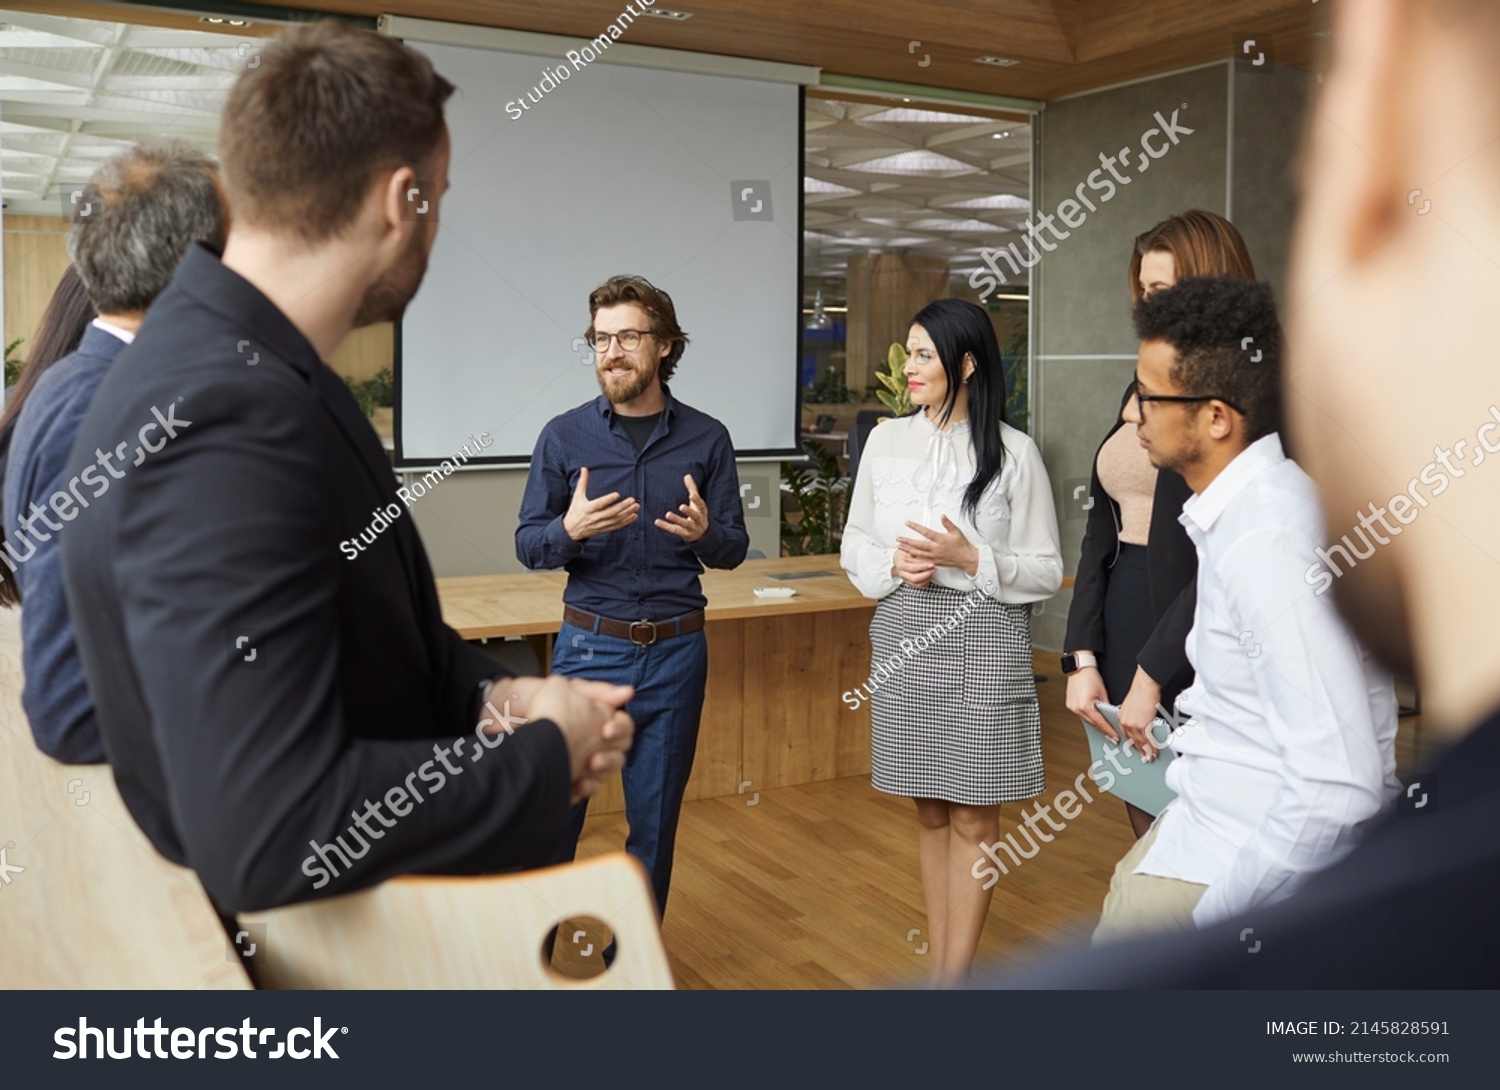 Business coach talking to group of people standing in office around him. Team of entrepreneurs and listening to business trainer speaking about creativity and teamwork, sharing advice and experience #2145828591